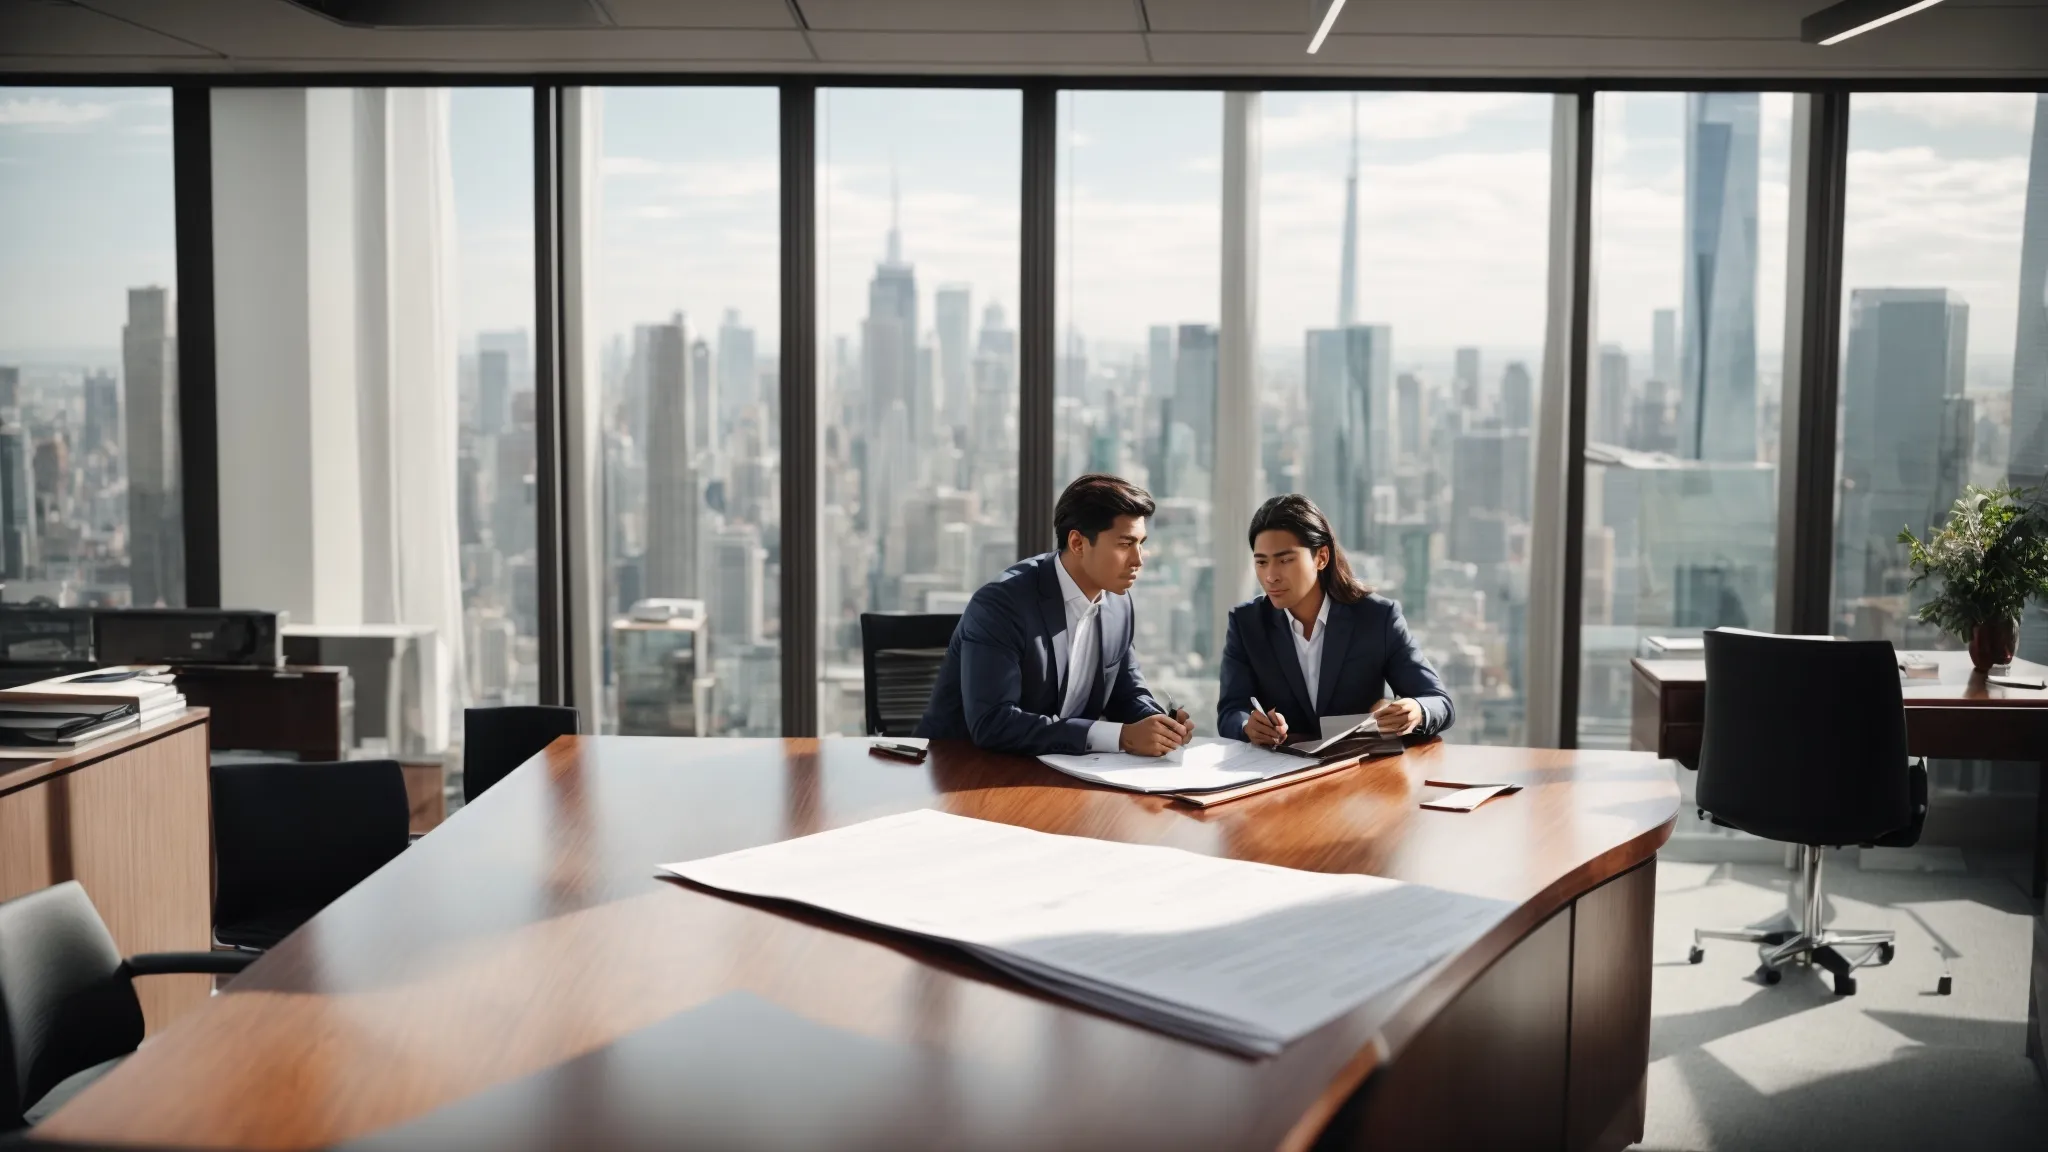 a client and a confident lawyer discuss over a large document-laden table in a bright, professional office overlooking a city skyline.